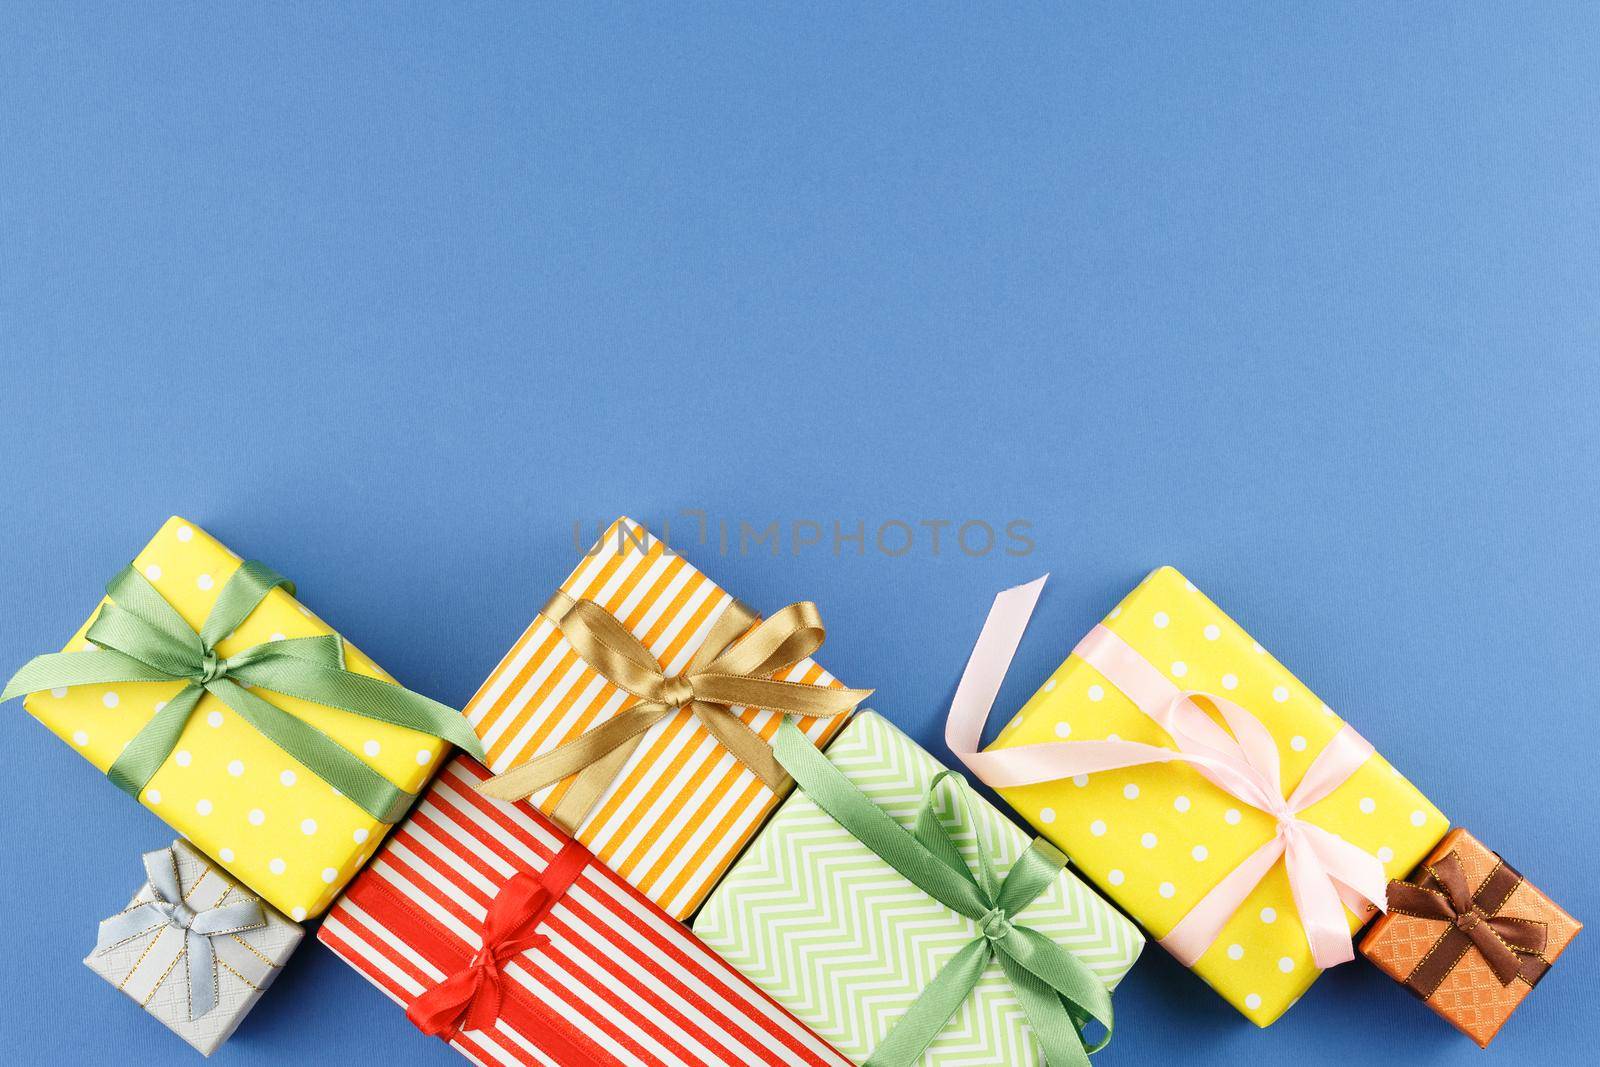 Gifts in colorful wrapping paper with ribbon bows on blue isolated background. Flat lay. Festive present concept. Top view.